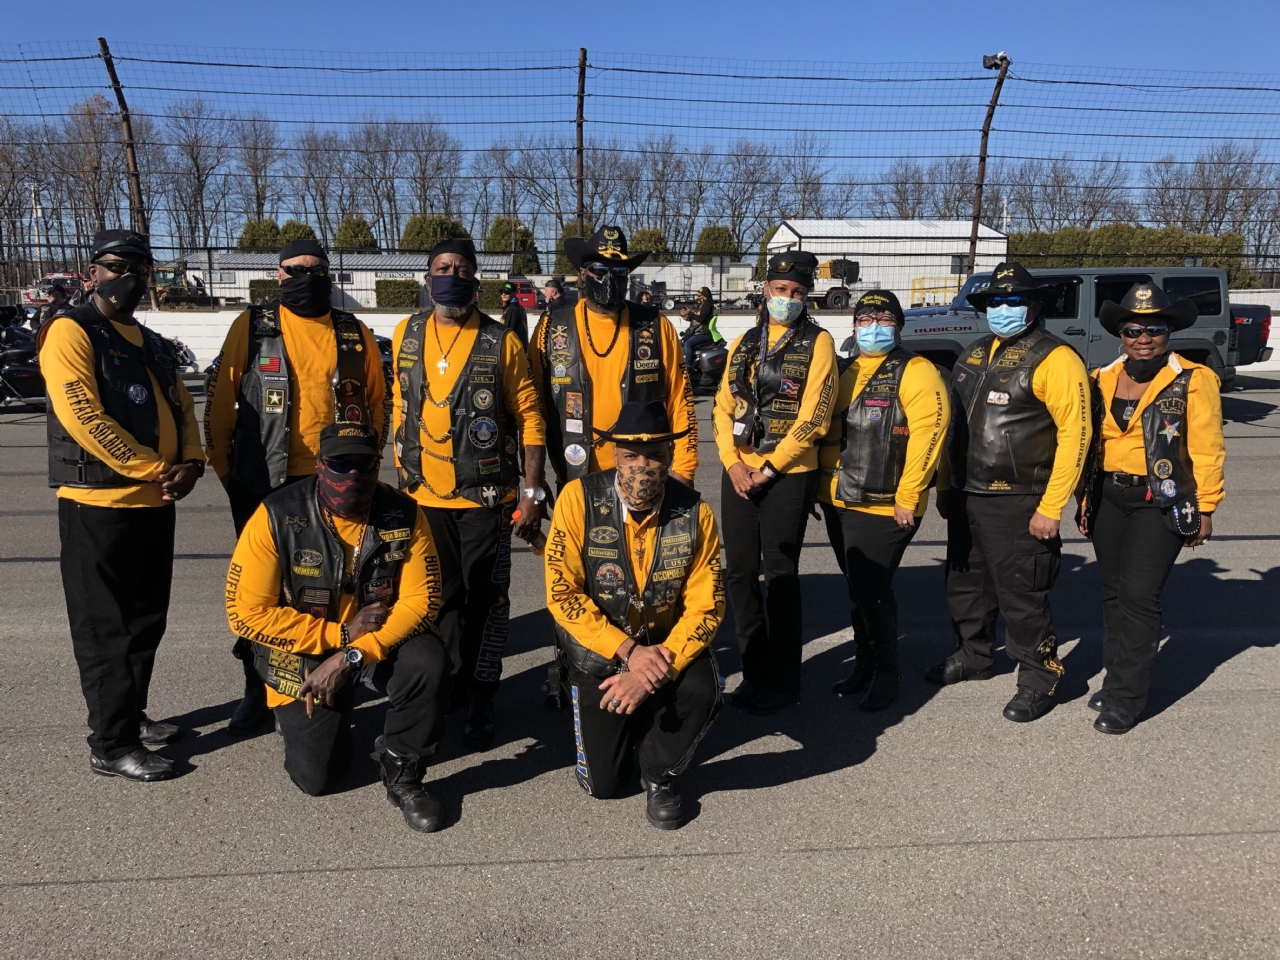 Group shot of Buffalo Solliders at the Monroe County Veterans Day Parade held at Pocono Speedway